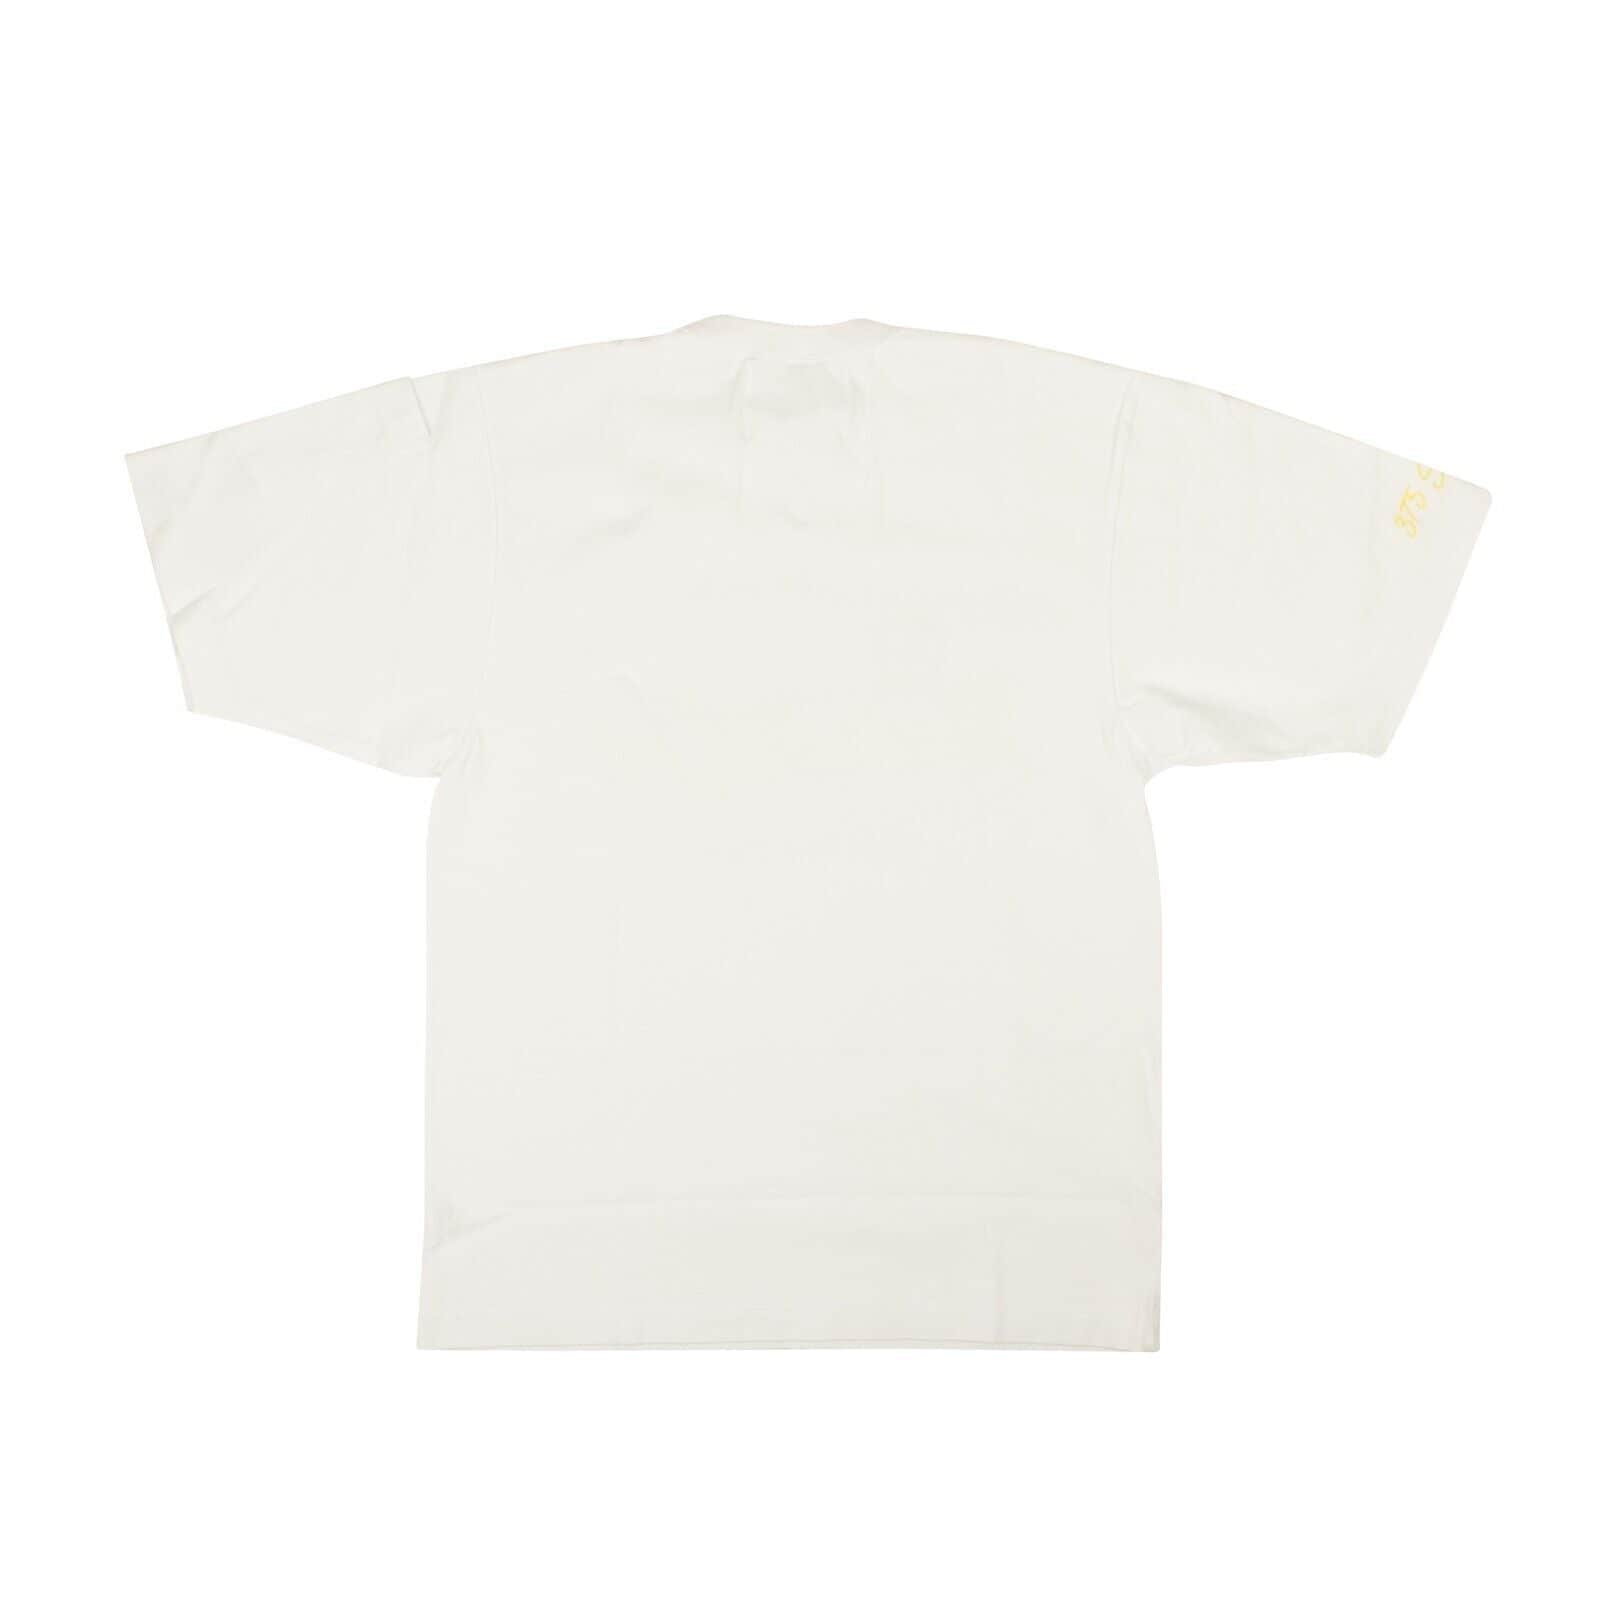 Sicko x 375 channelenable-all, chicmi, couponcollection, gender-mens, main-clothing, shop375 S White And Yellow Logo Short Sleeve T-Shirt 95-SKO-1013/S 95-SKO-1013/S